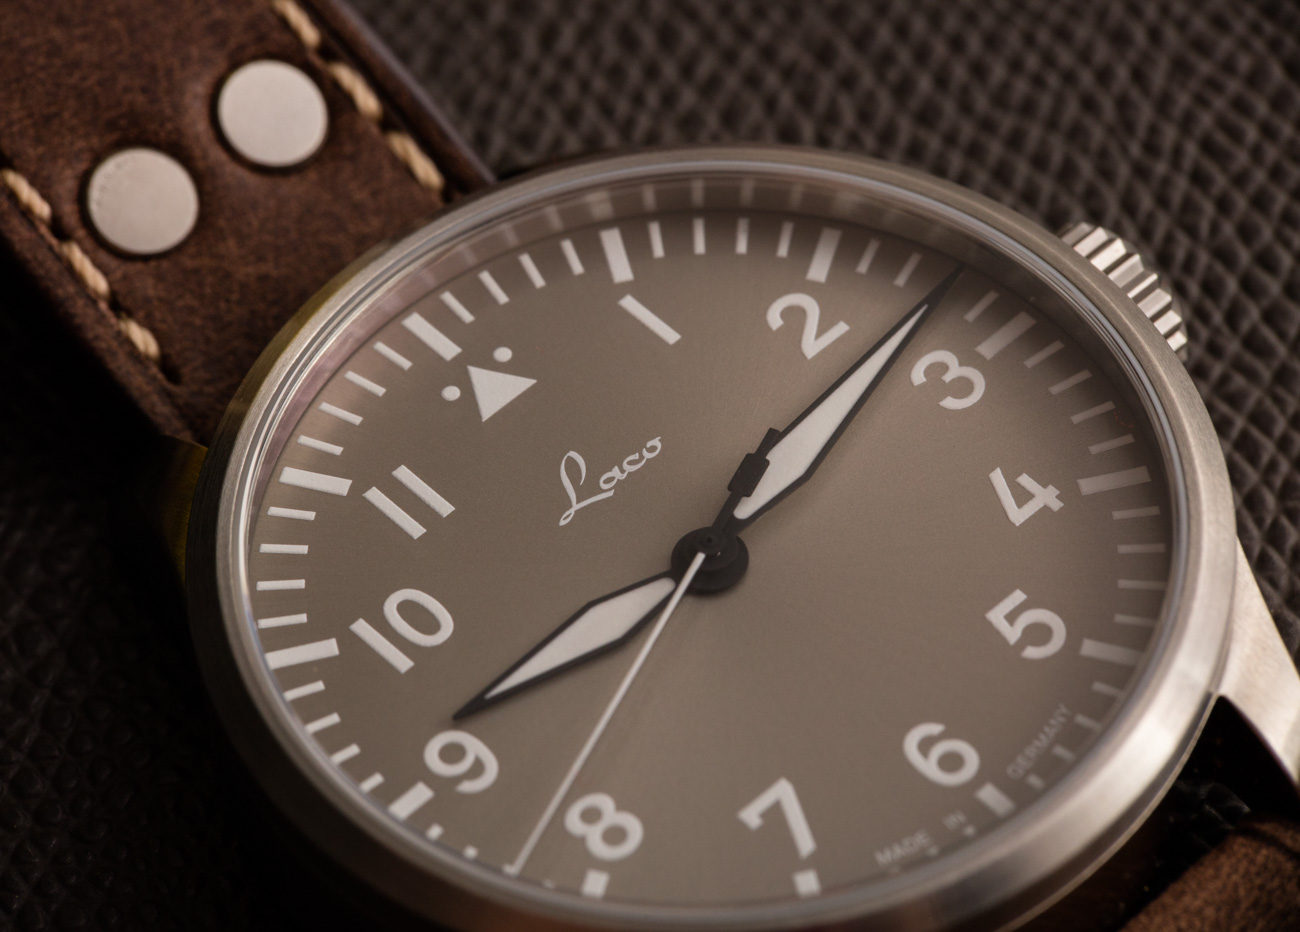 Laco Pilot Augsberg Taupe 42 Watch Hands-On